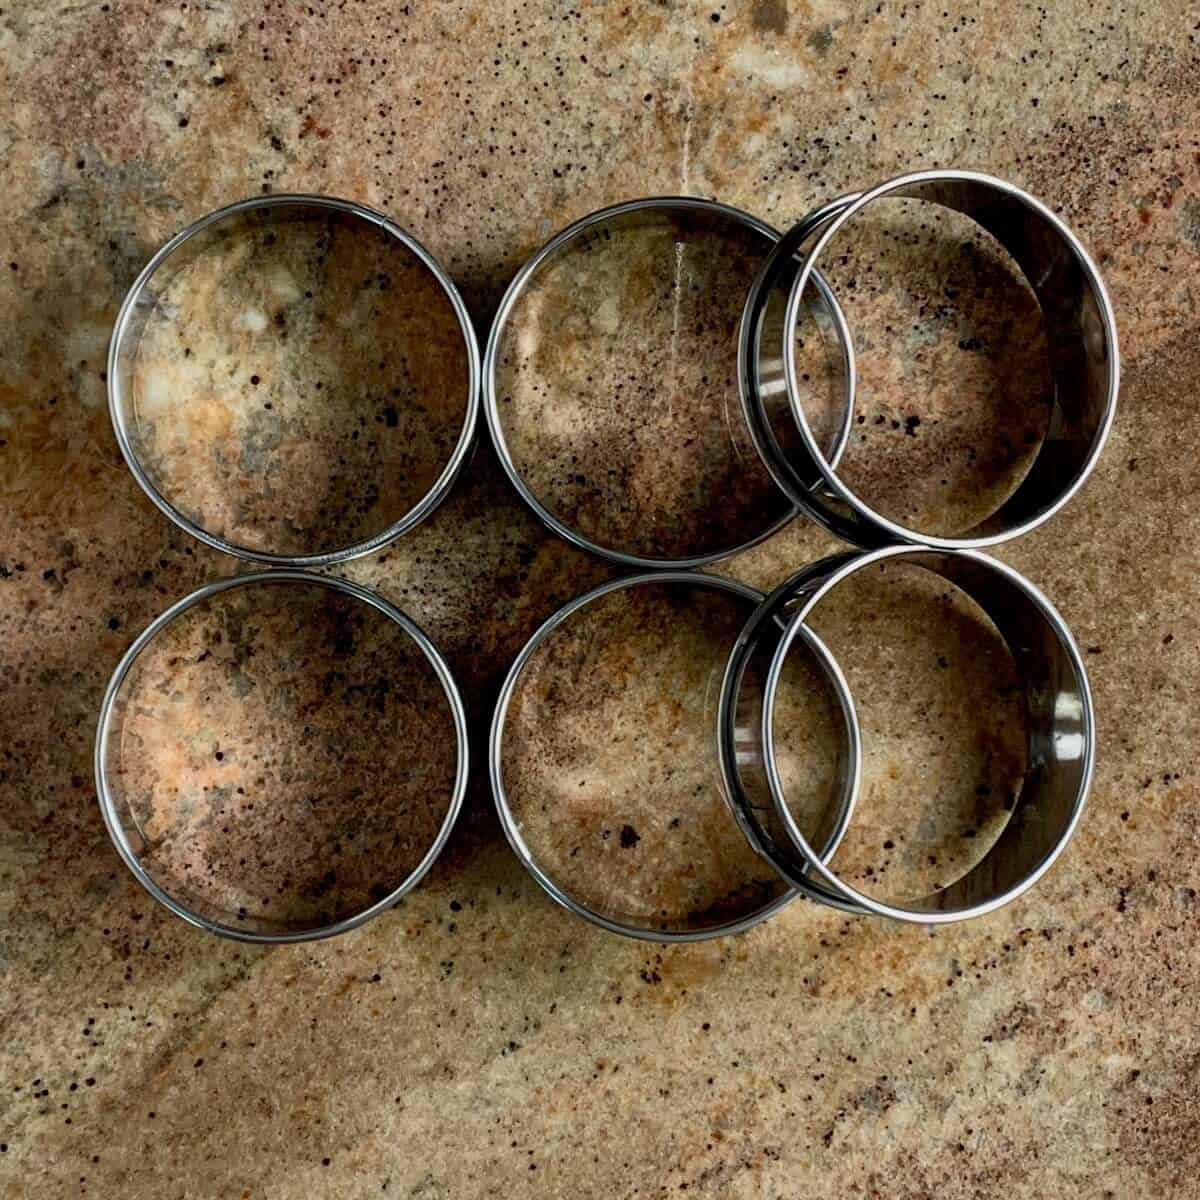 Six English muffin rings on a counter from overhead.